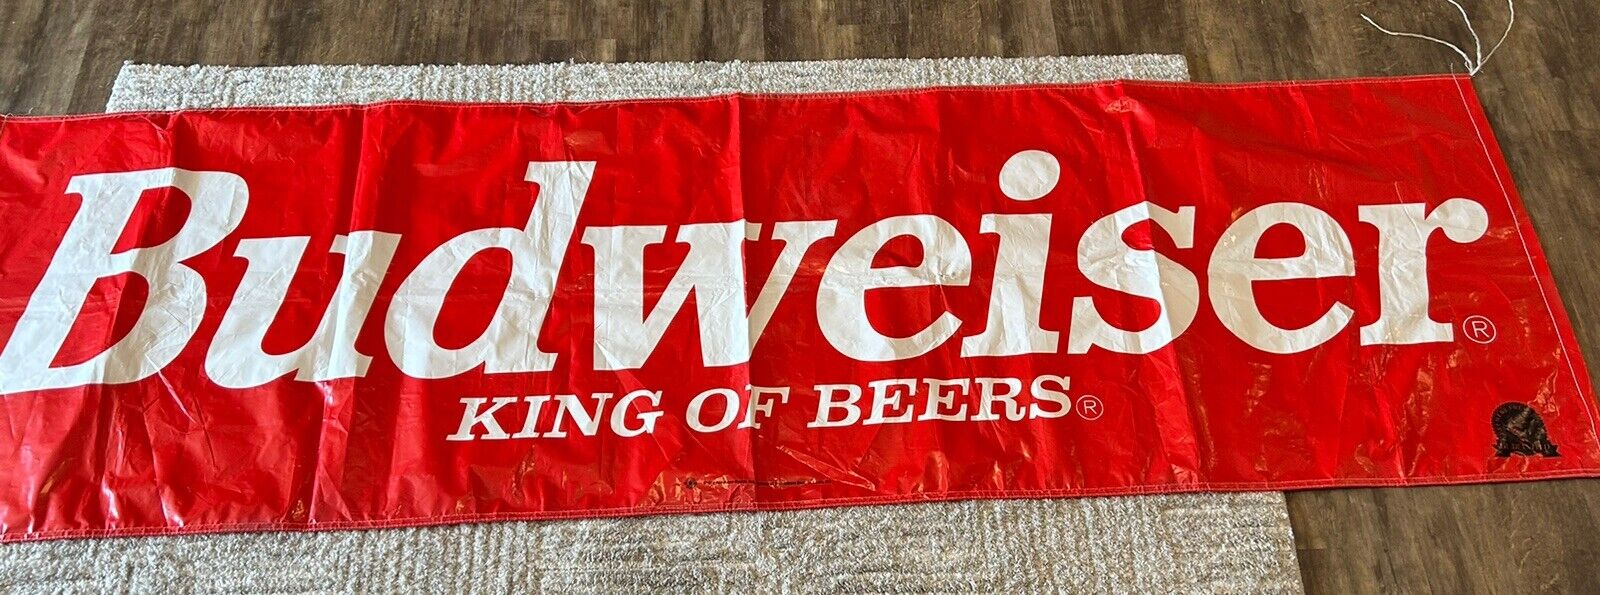 Vintage Budweiser King Of Beers Vinyl Banner Made In 1992 Red & White